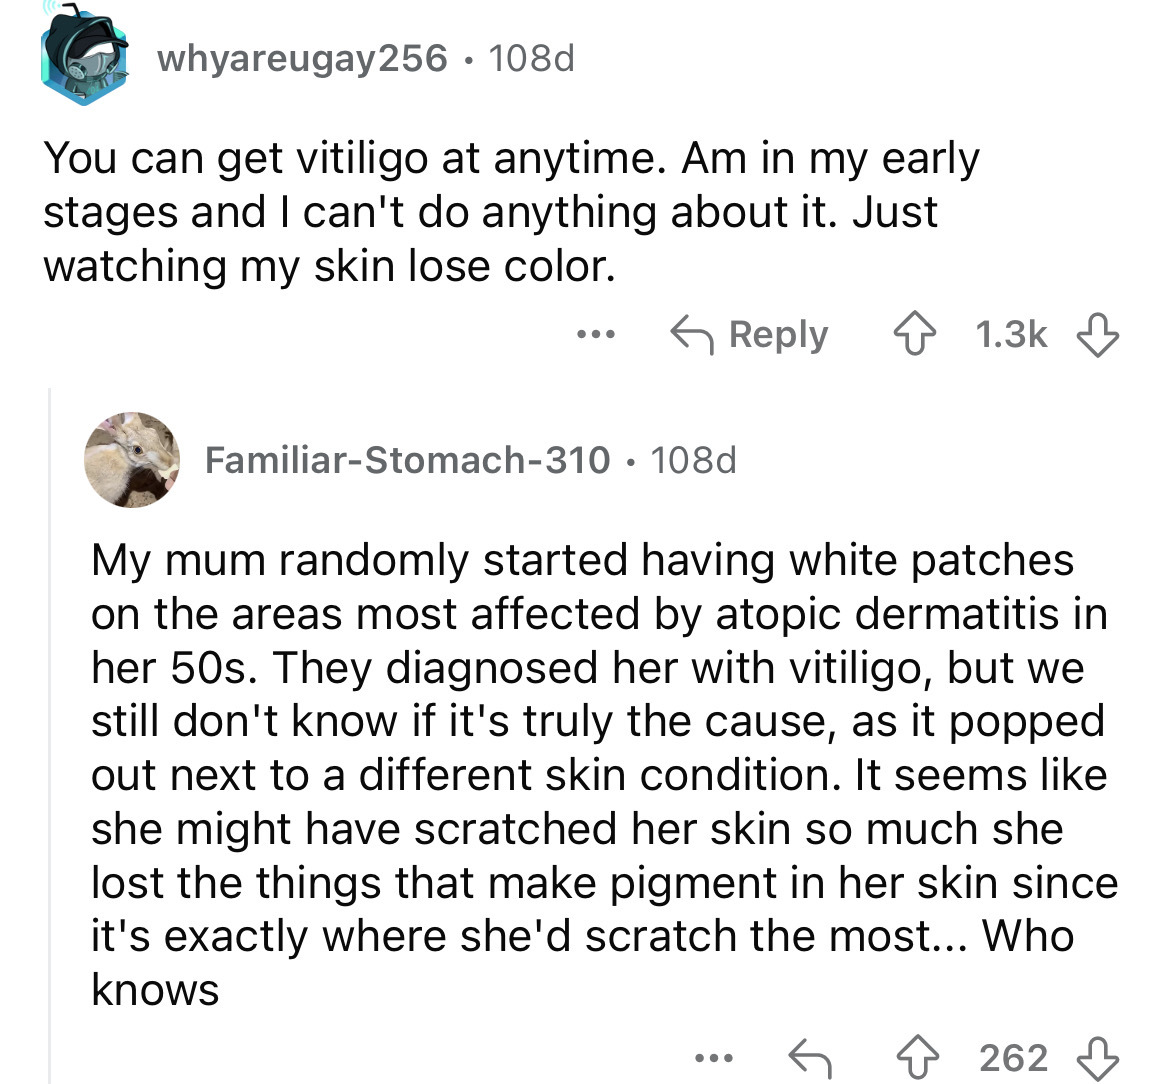 document - whyareugay256 108d . You can get vitiligo at anytime. Am in my early stages and I can't do anything about it. Just watching my skin lose color. ... FamiliarStomach310 108d My mum randomly started having white patches on the areas most affected 